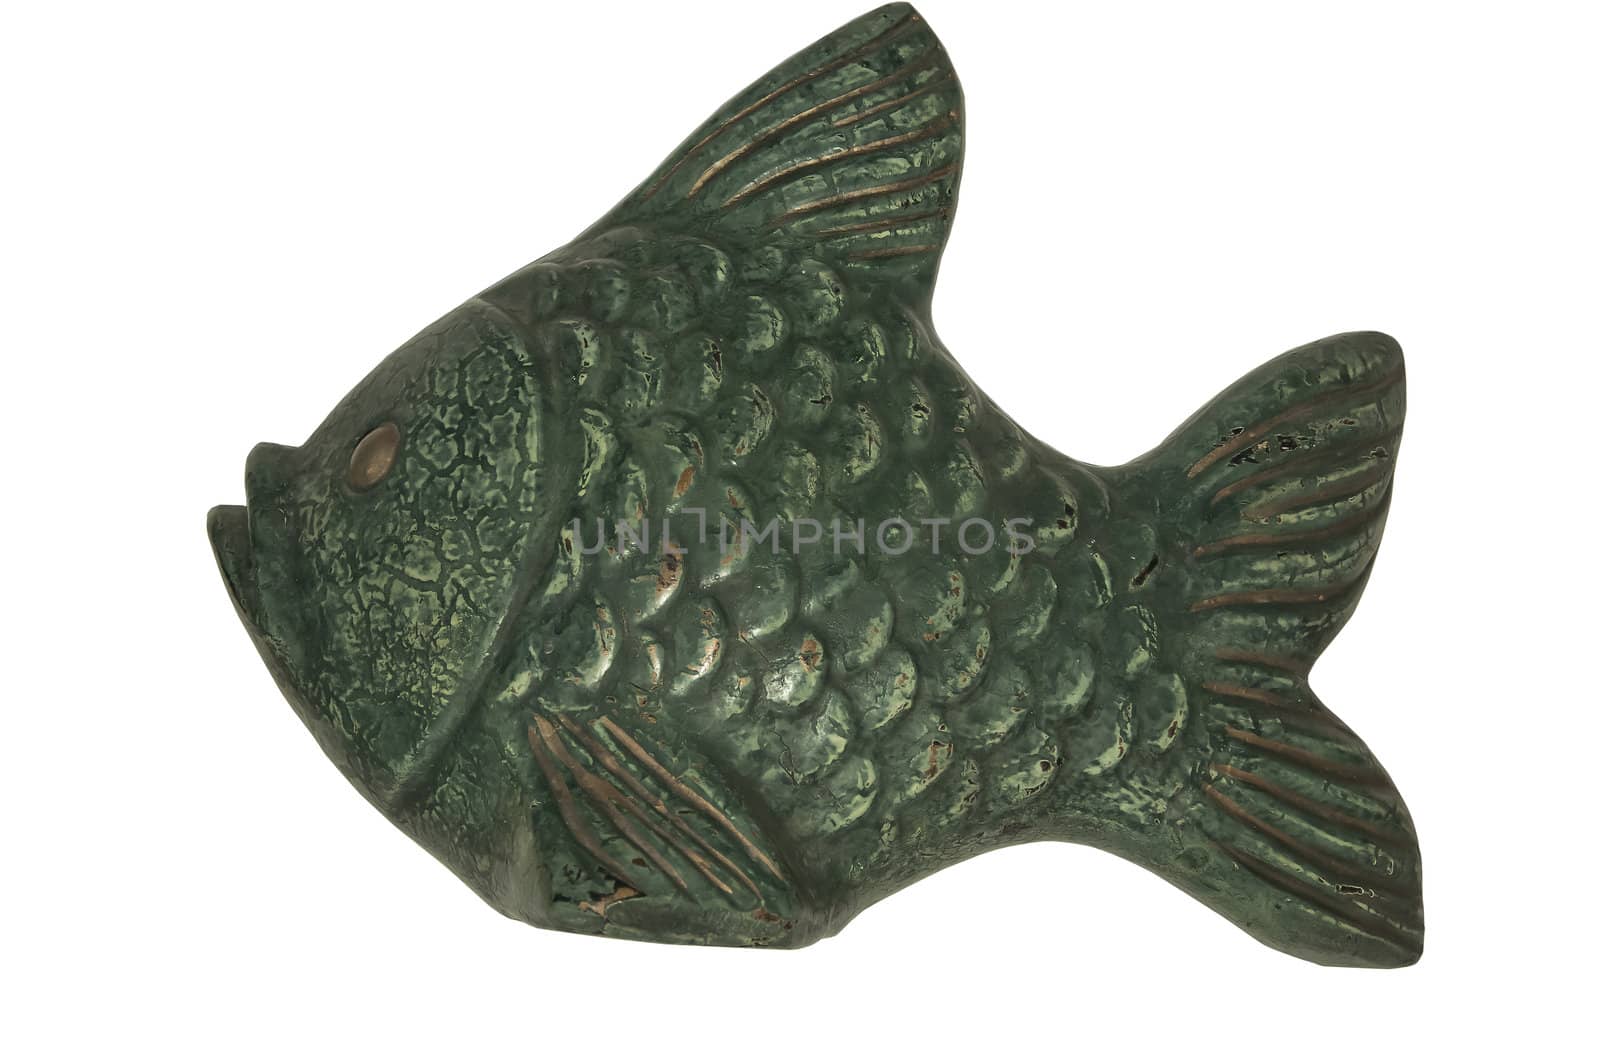 Sculpture of ceramic fish isolated on a white background